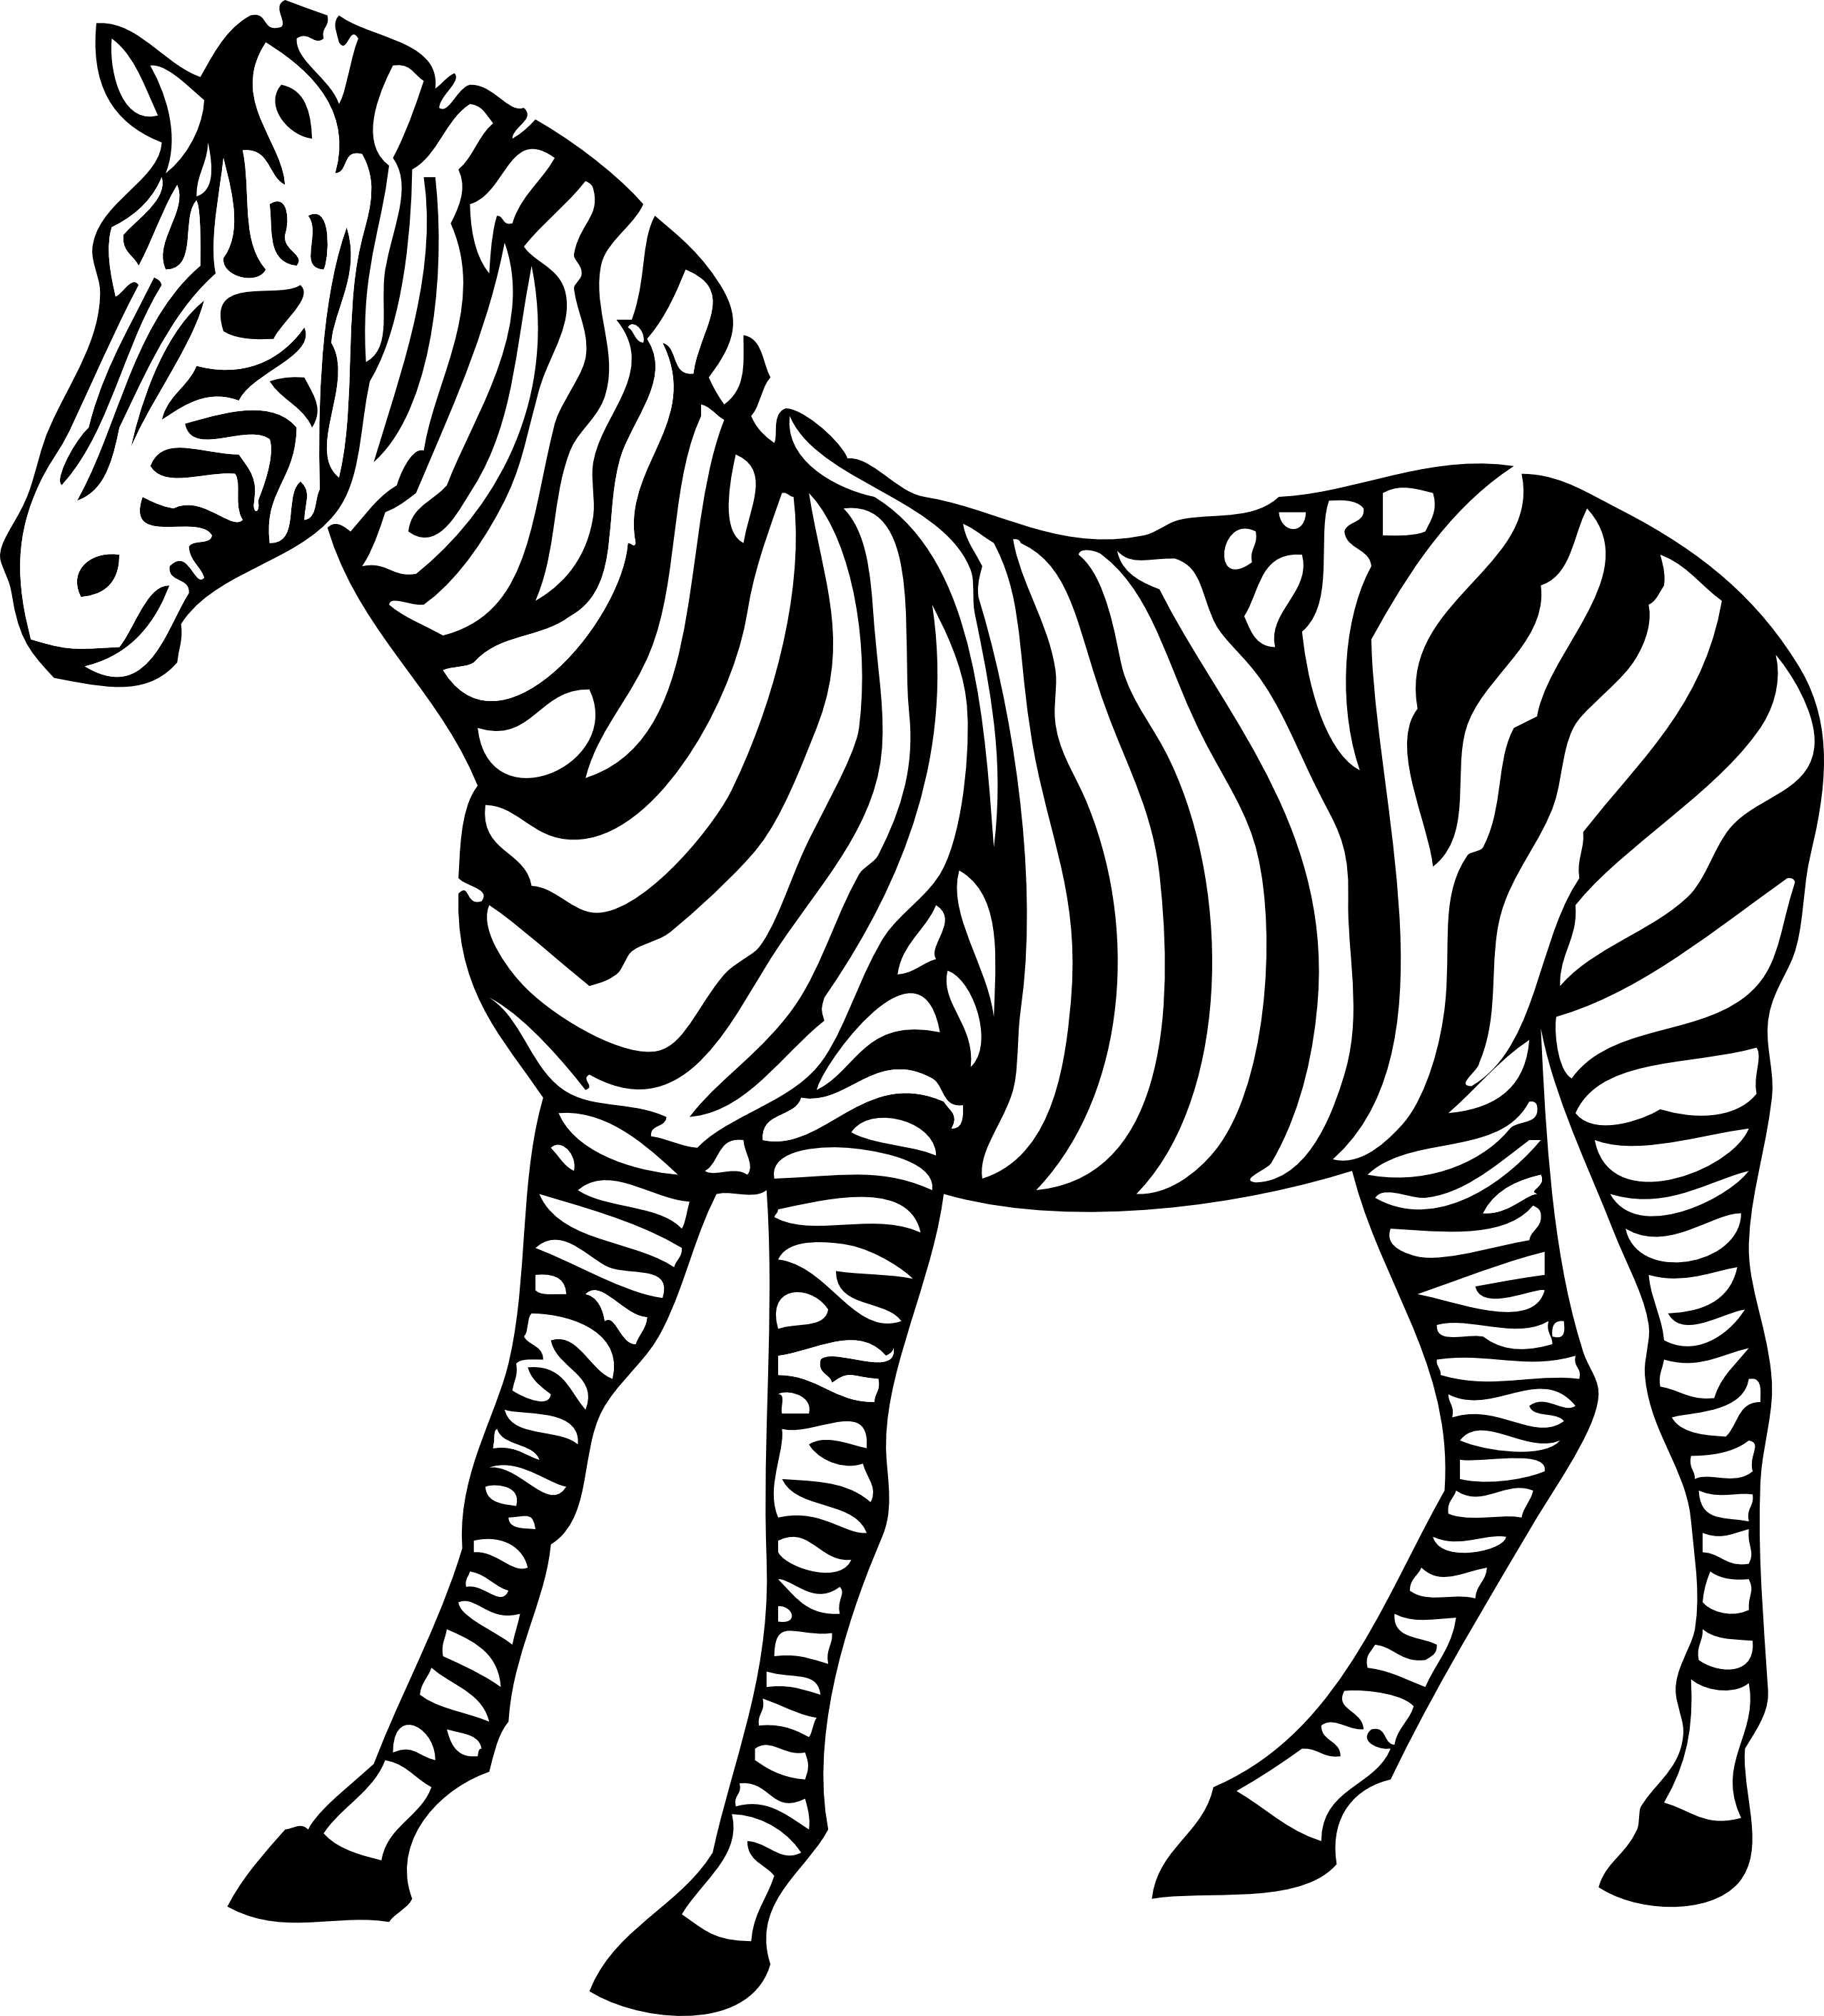 Zebra Clip Art Black And White | Clipart library - Free Clipart Images